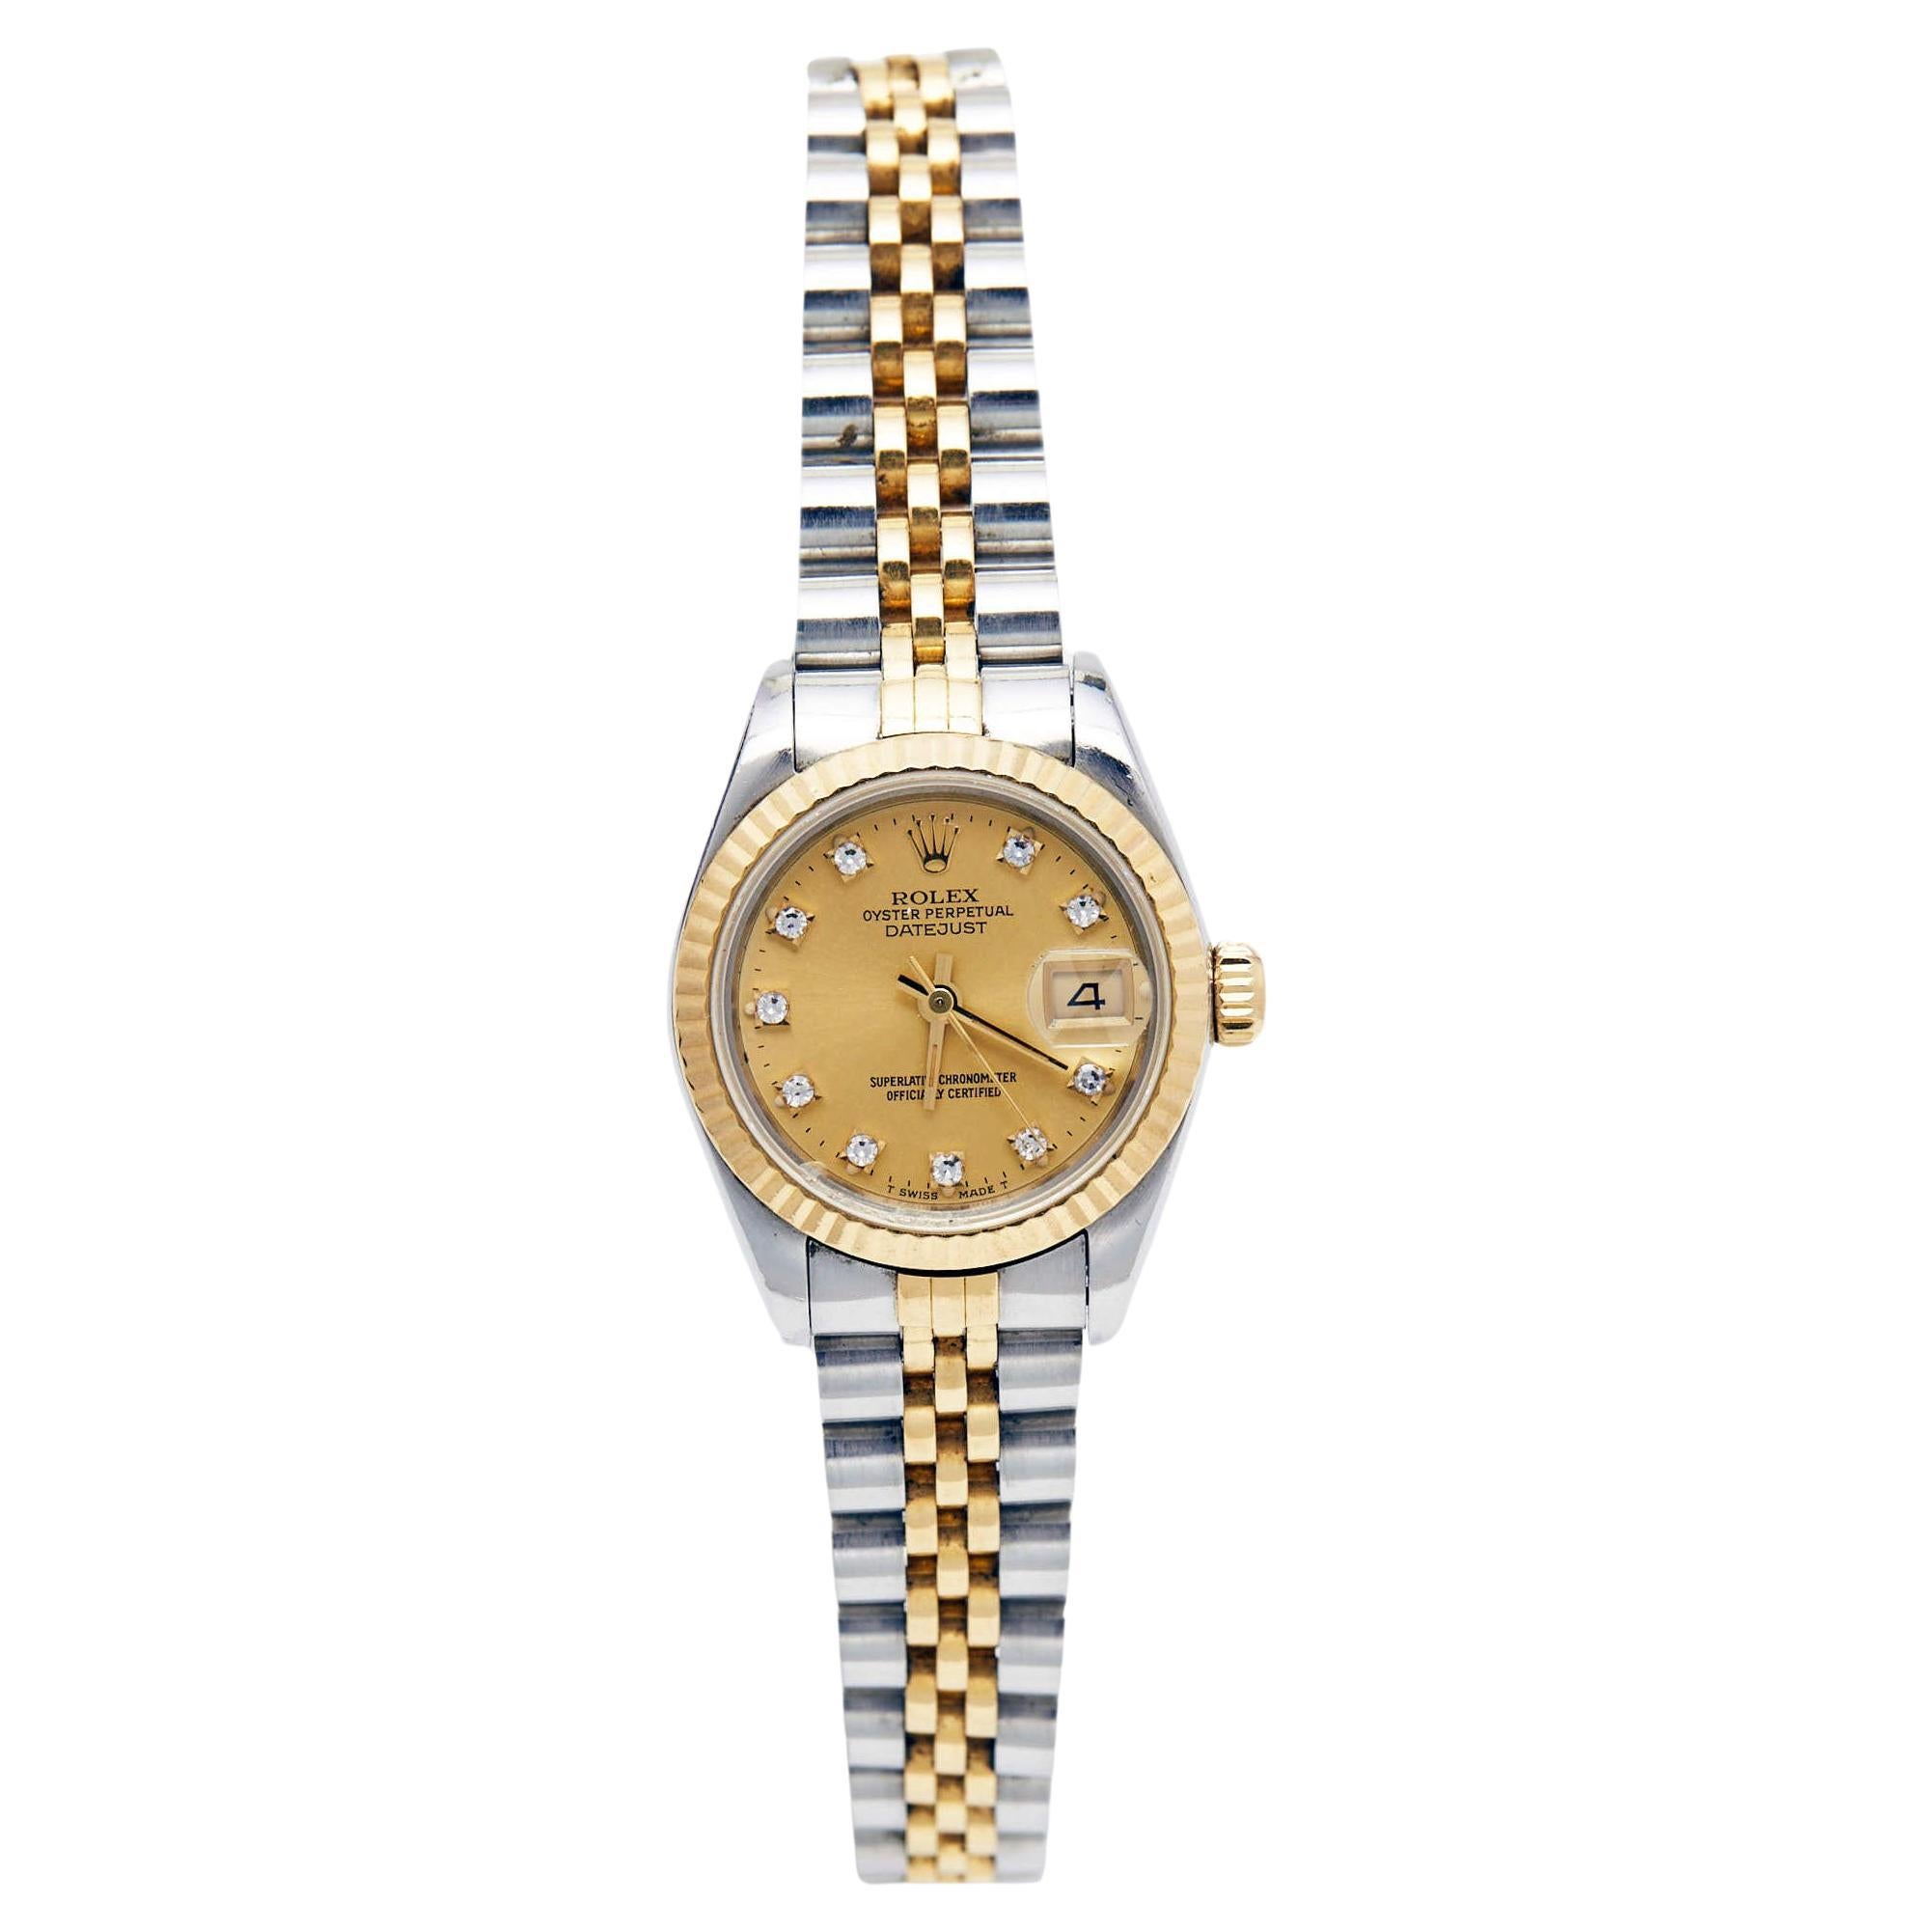 Rolex Champagne Diamond 18k Yellow Gold And Stainless Steel Datejust 69173 Autom For Sale